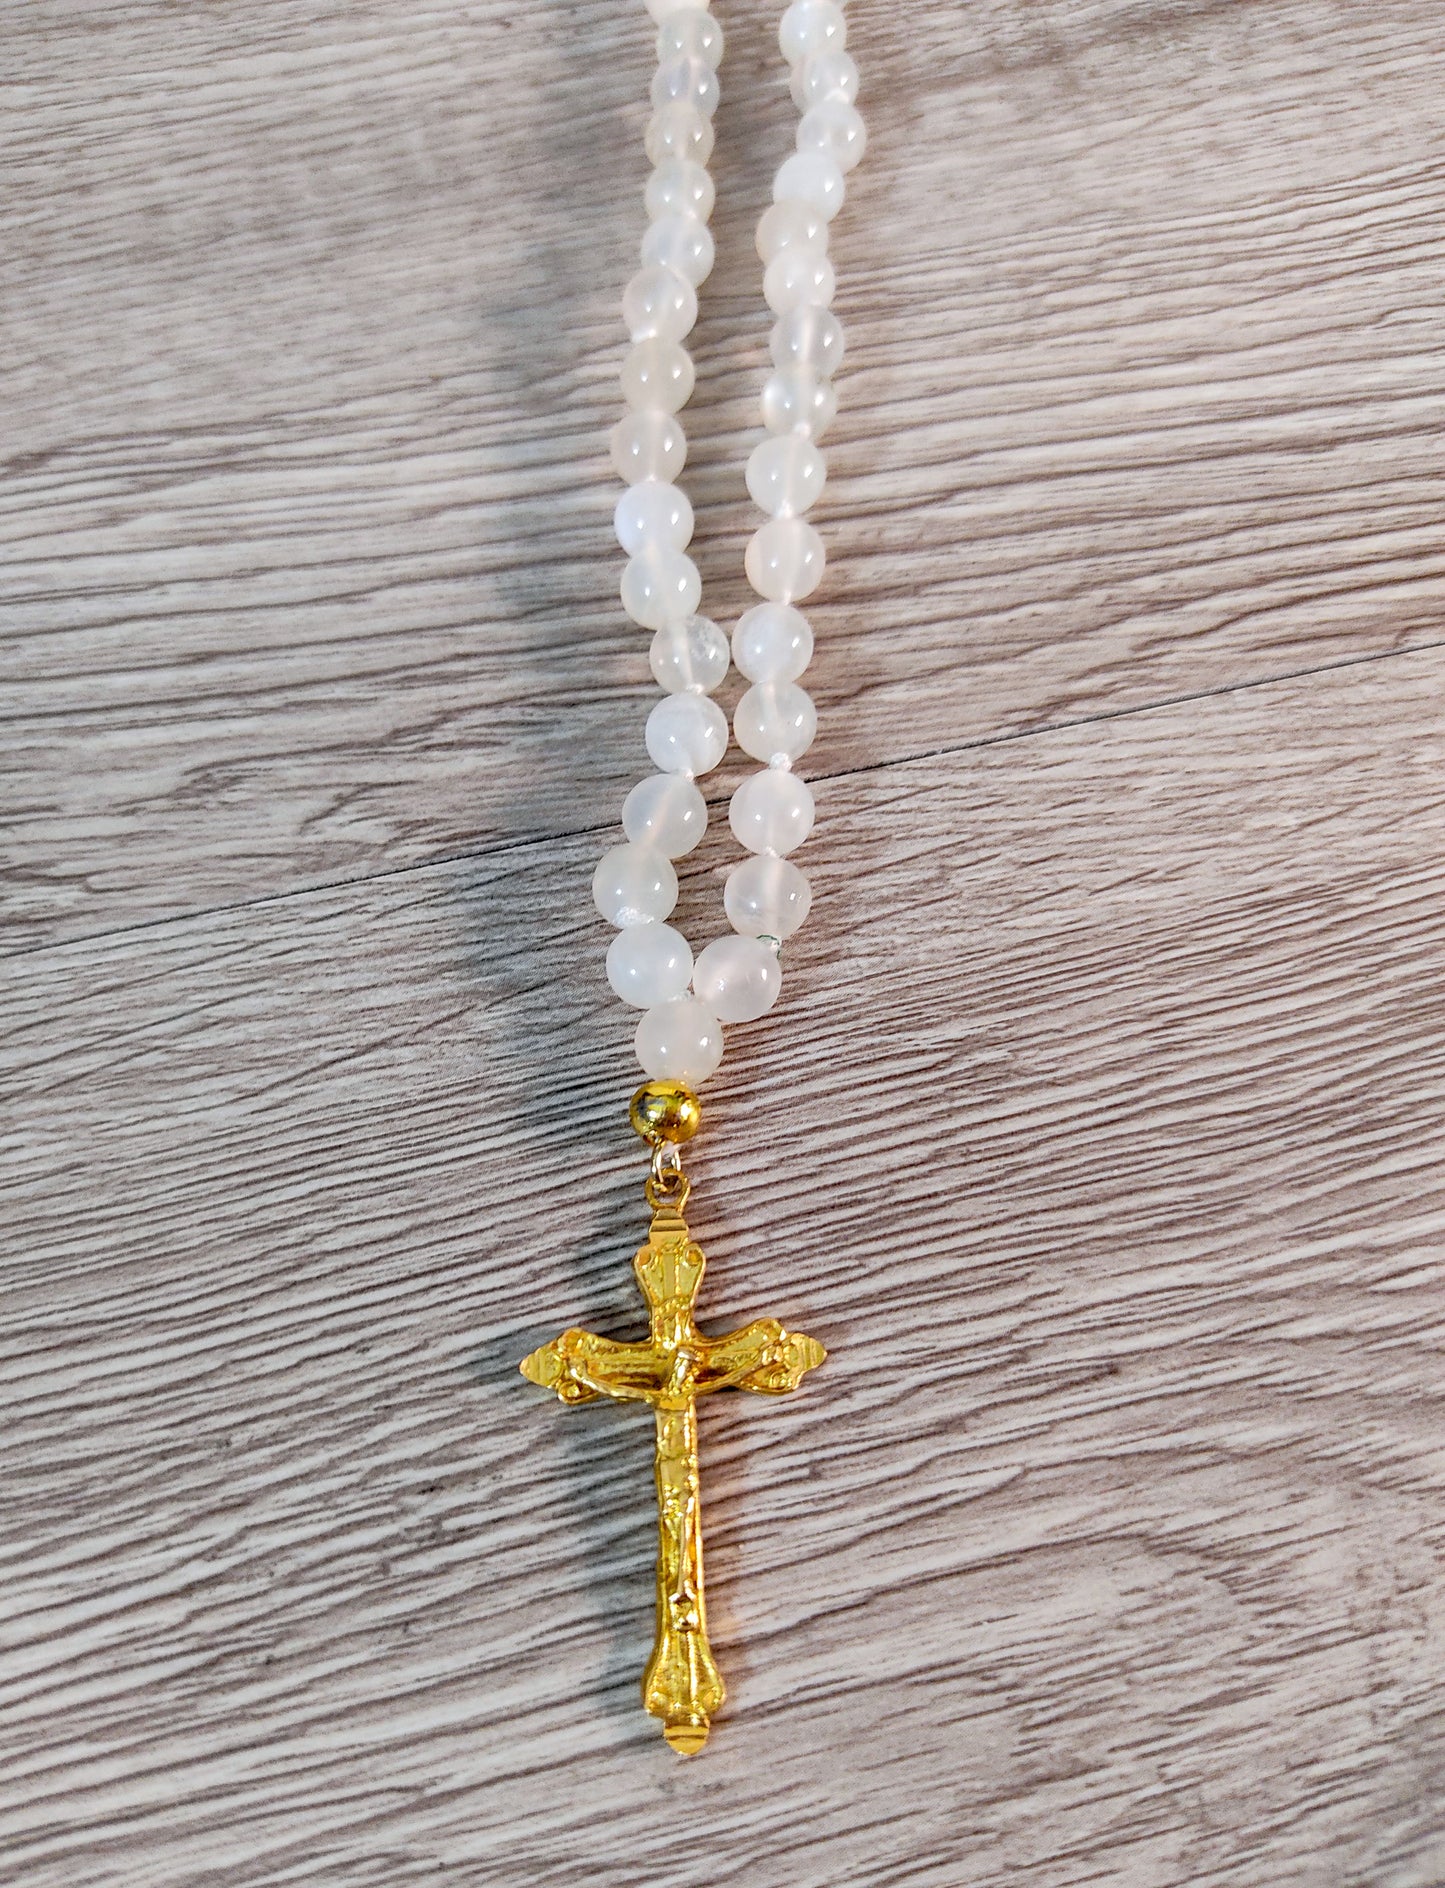 Moonstone Beads Mala Necklace with Gold Plated Crucifix Pendant 31" Handmade